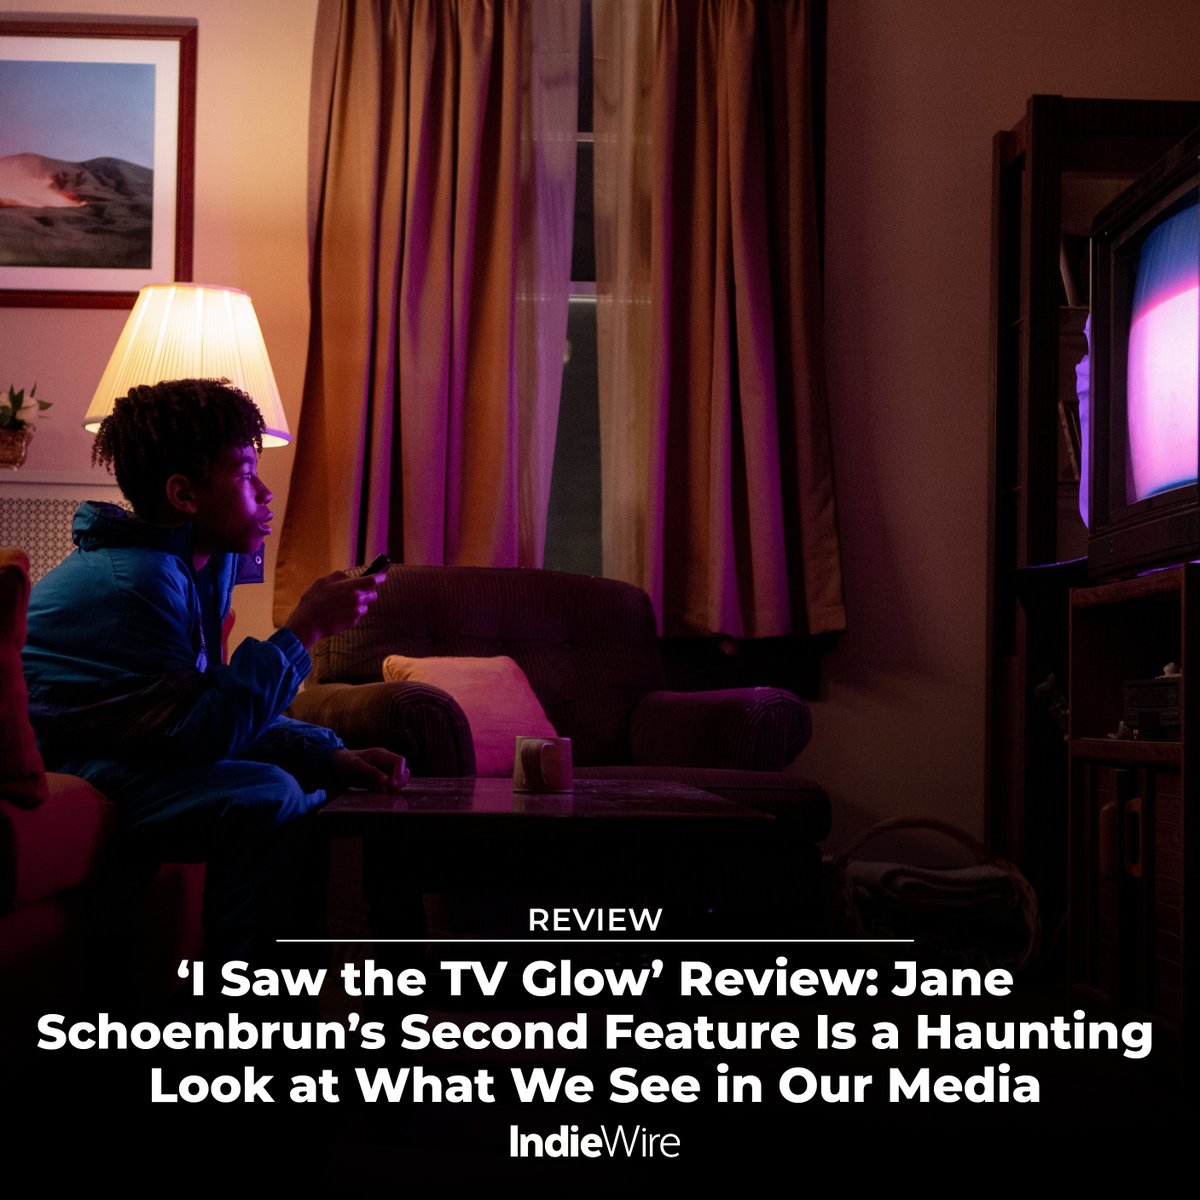 “I Saw the TV Glow” is an intimate landscape shot with the ultra-vivid resolution of a recurring dream; it marries the queer radicality of a Gregg Araki film with the lush intoxication of a Gregory Crewdson photo. Read our review: trib.al/XDT52at